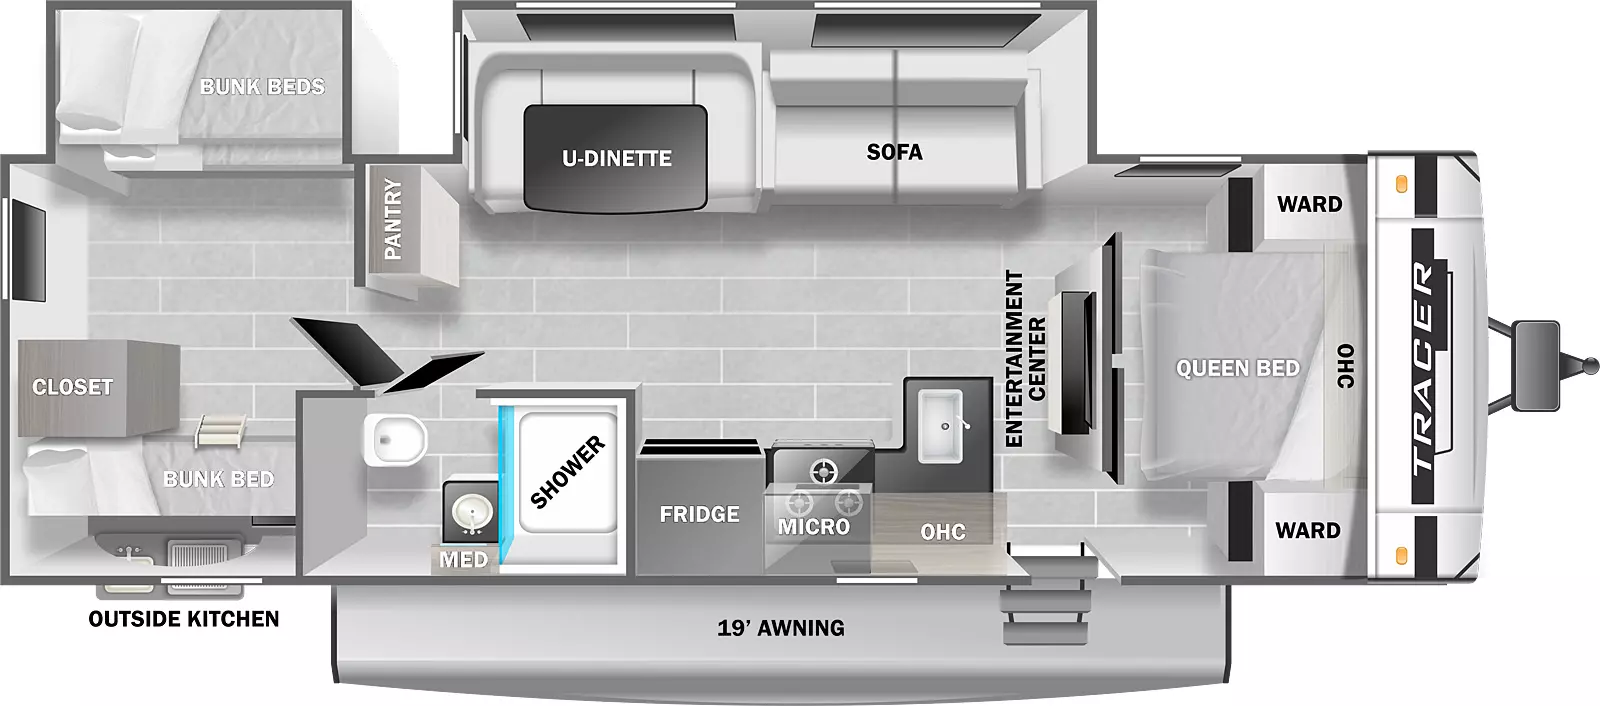 The Tracer 31BHD floorplan has one entry door, a 19 foot power awning, an outside kitchen with a sink and a grill, and two slideouts. The entry door leads to the front bedroom on the right and a living area on the left. Directly to the left of the entry door is an L-shaped counter top with a sink and stove. A microwave is above the stove. Overhead storage is above the countertop to the right of the microwave. To the left of the countertop is a refrigerator. The rear wall of the living area leads to a bunk room in the rear of the RV. The bunk room has bunk beds with a ladder on the door side. It has a closet to the right of the bunk beds. The room has a slideout on the off door side with bunk beds. The front of the bunk room has a door in the middle. The door leads to a bathroom door on the right and the living area on the left. The bathroom has a toilet, a sink with a medicine cabinet above and a shower. Back in the living area, the rear off door corner has a pantry. The off door side slideout is to the right of the pantry. The slideout has a U-dinette and a sofa. The front wall of the living area has an entertainment center. Sliding doors are on the left and right of the entertainment center. The sliding doors both lead to the bedroom. The bedroom has a queen bed with a wardrobe and night stand on the right and left and overhead storage above.